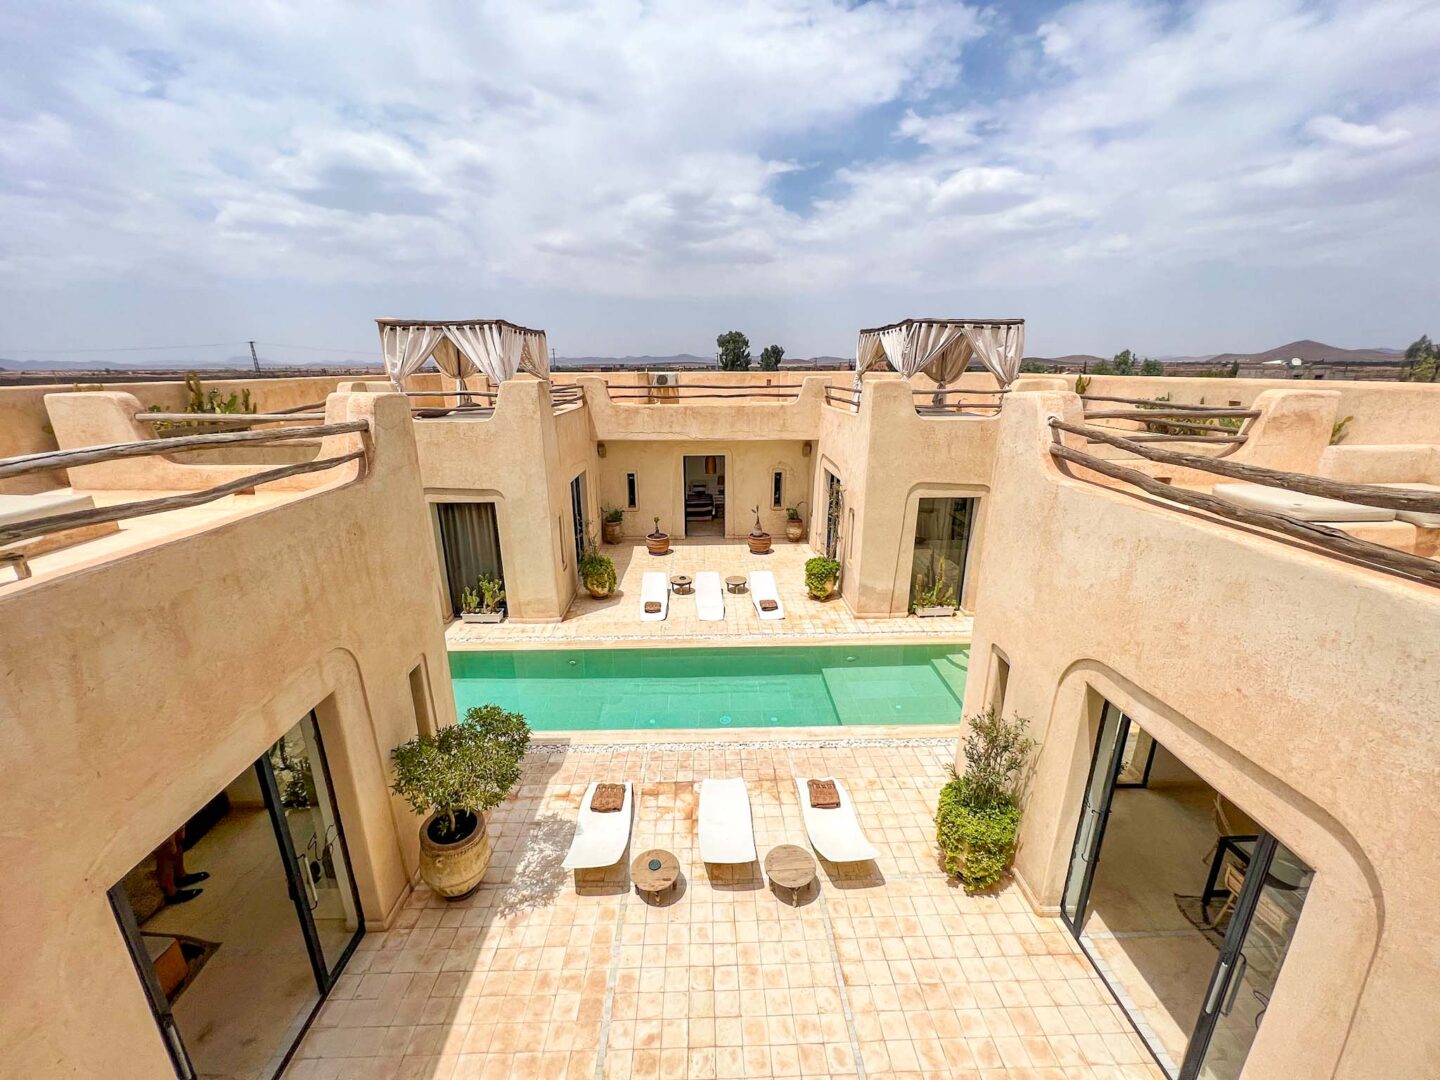 villa in Marrakech from above with pool and rooftop 